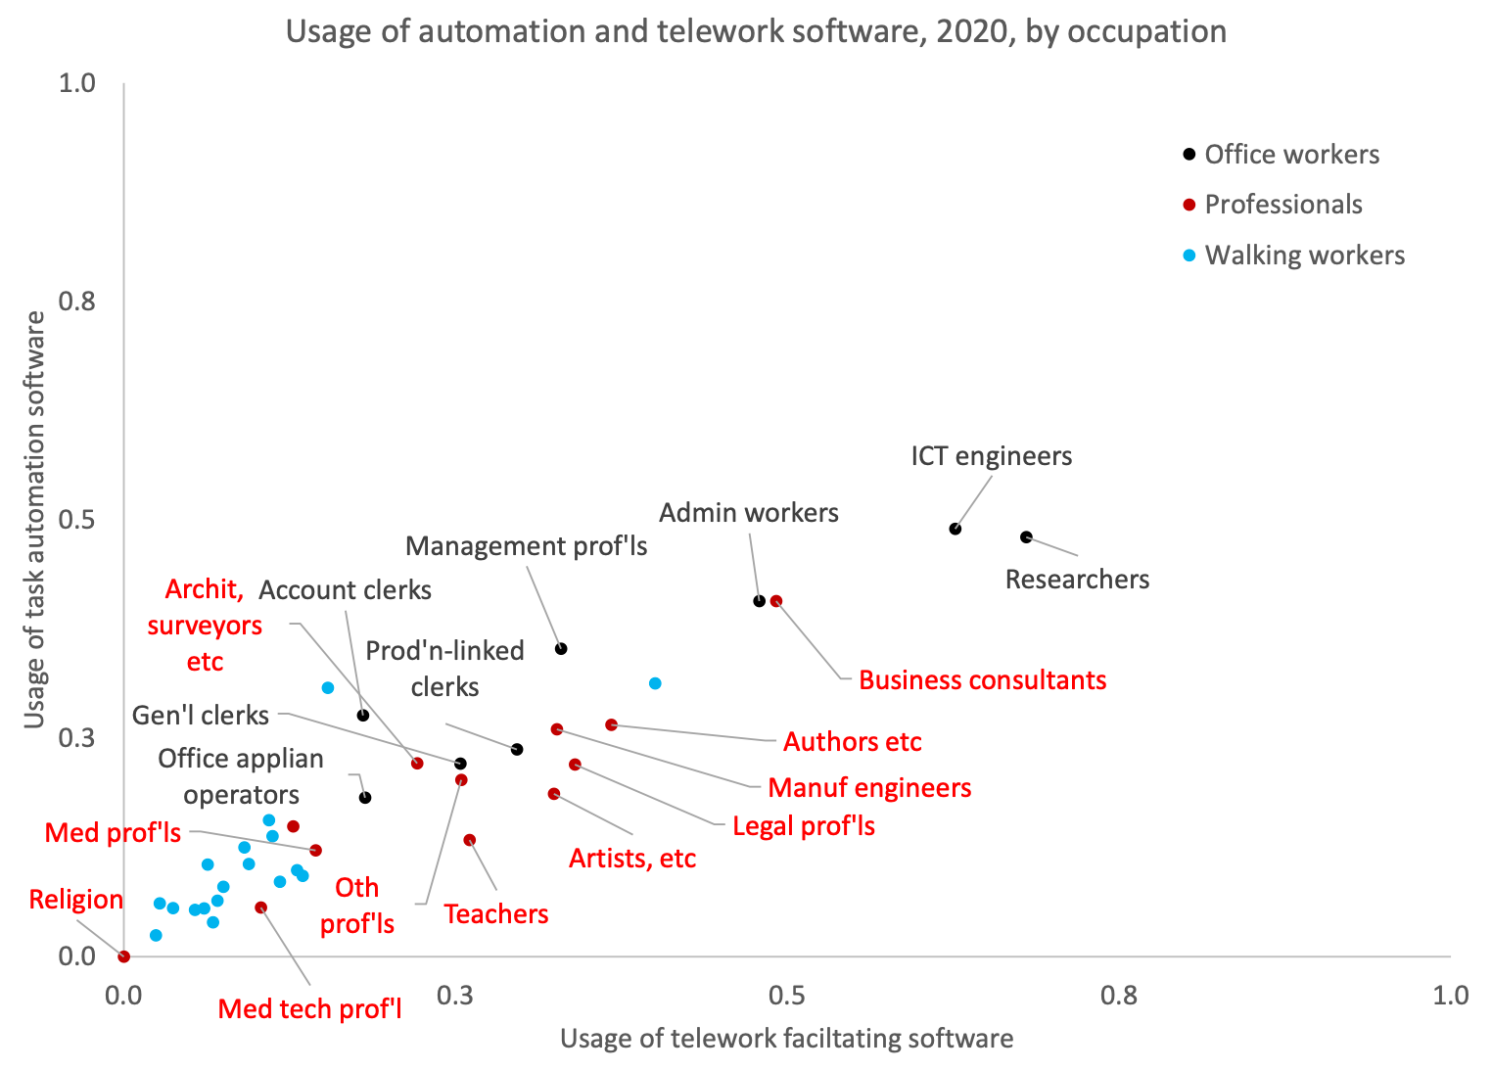 Figure 5 Usage in 2020 of software facilitating telework and task automation